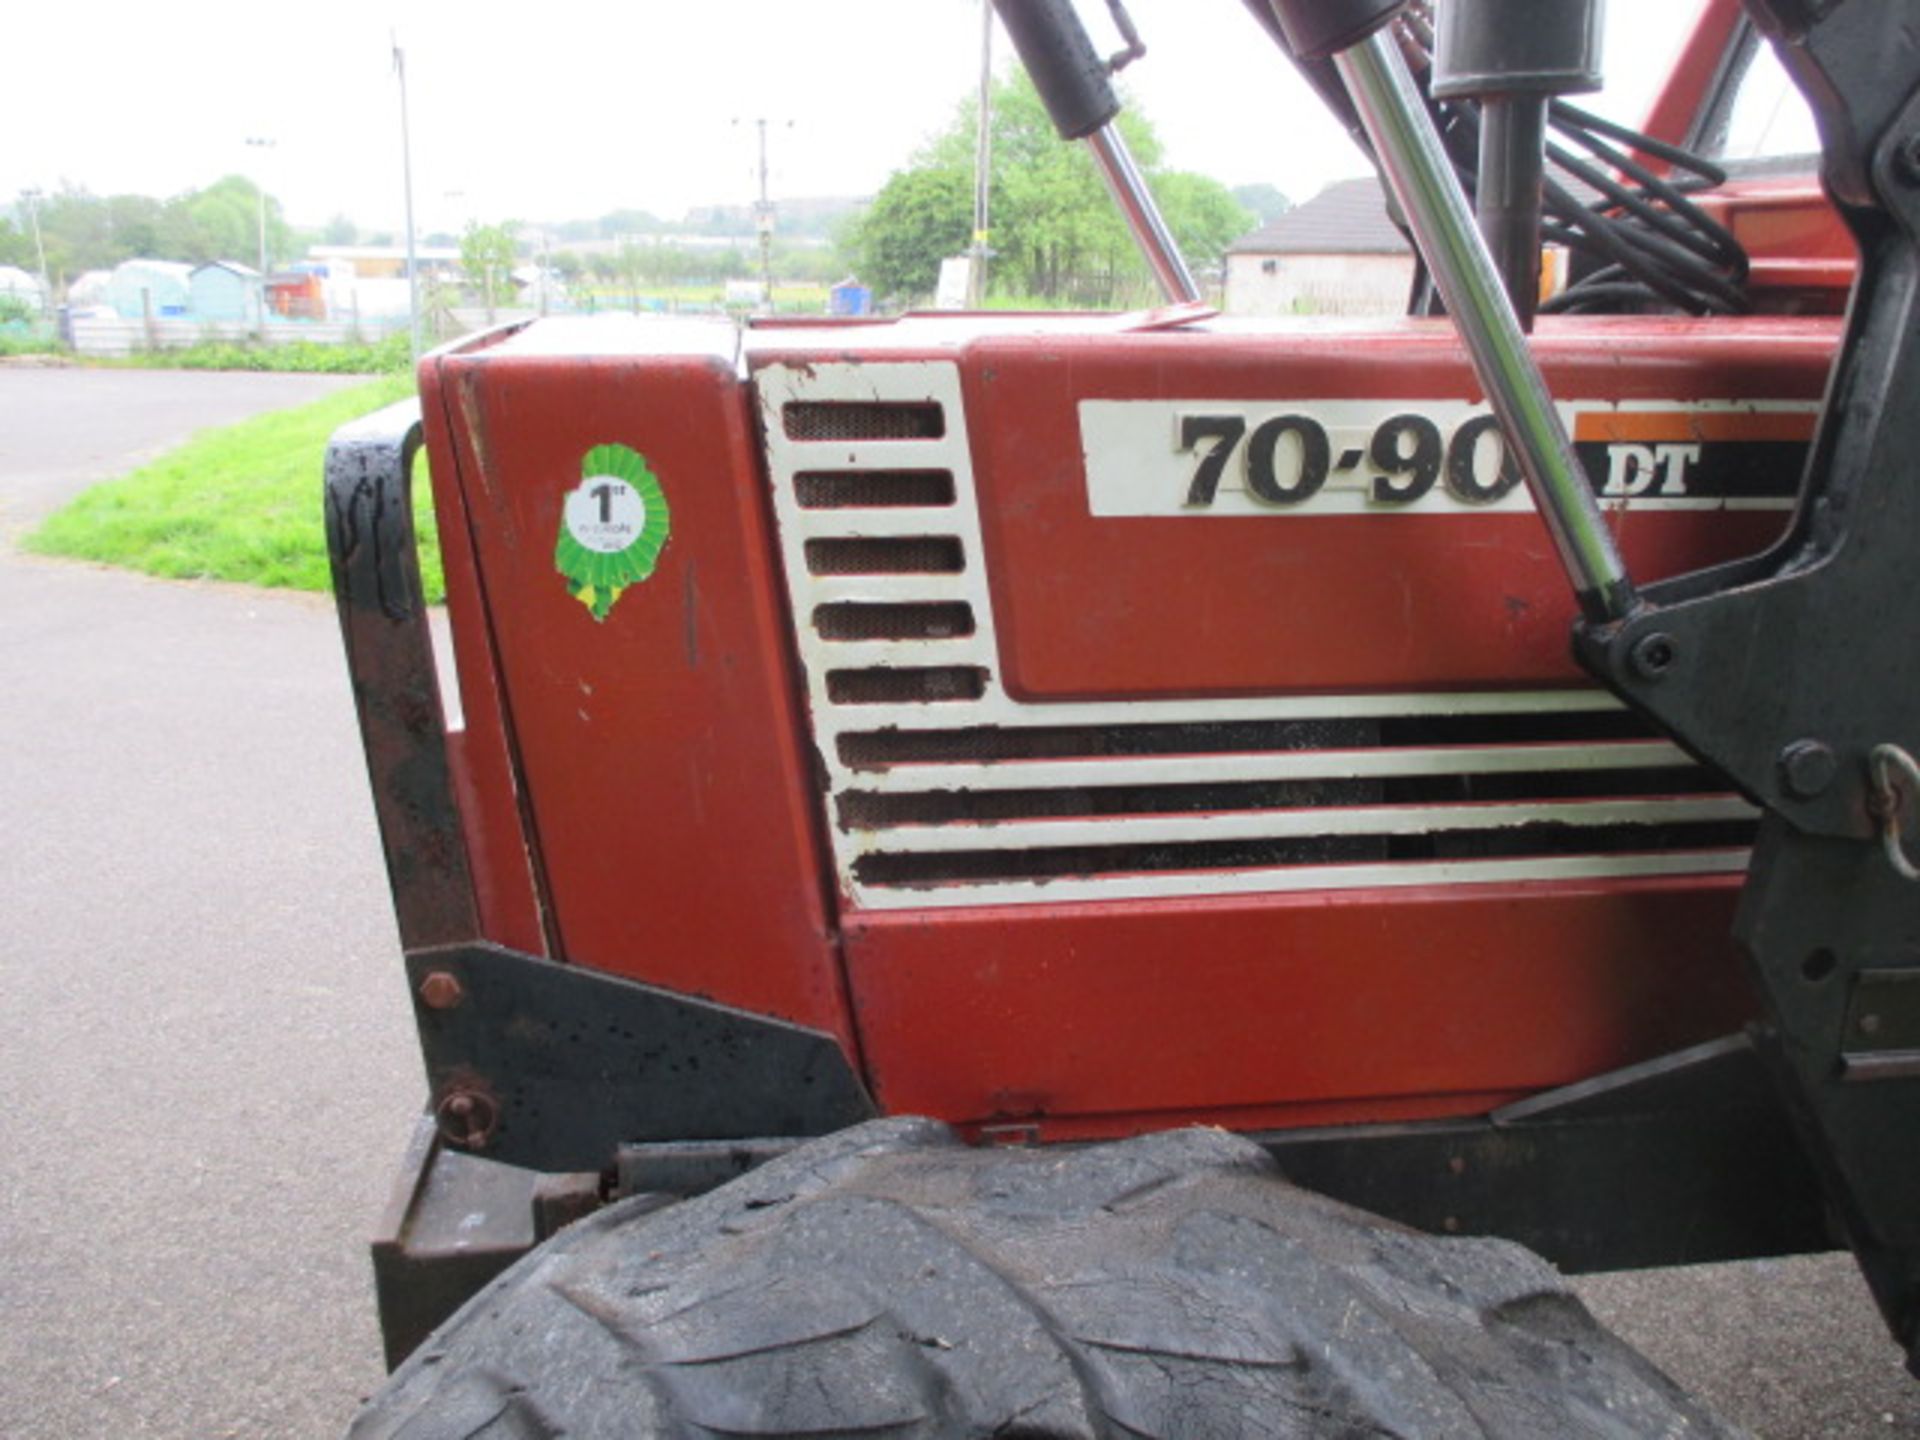 Fiat 70-90 4wd Tractor c/w McConnel 065 power loader, bucket and manual. First registered in Feb - Image 5 of 9